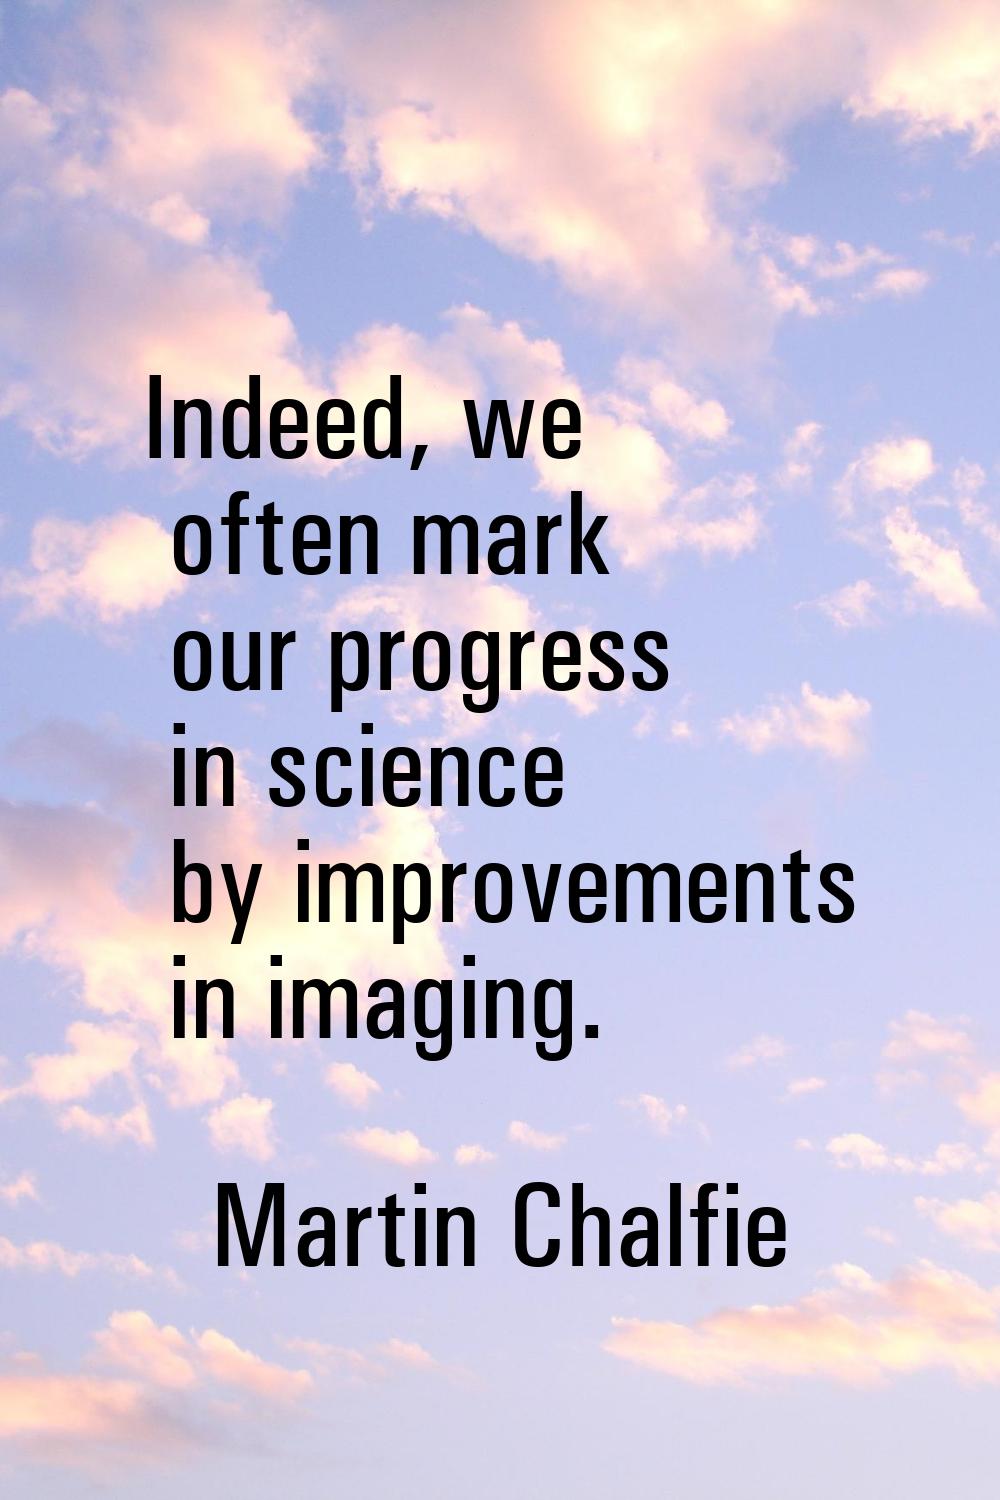 Indeed, we often mark our progress in science by improvements in imaging.